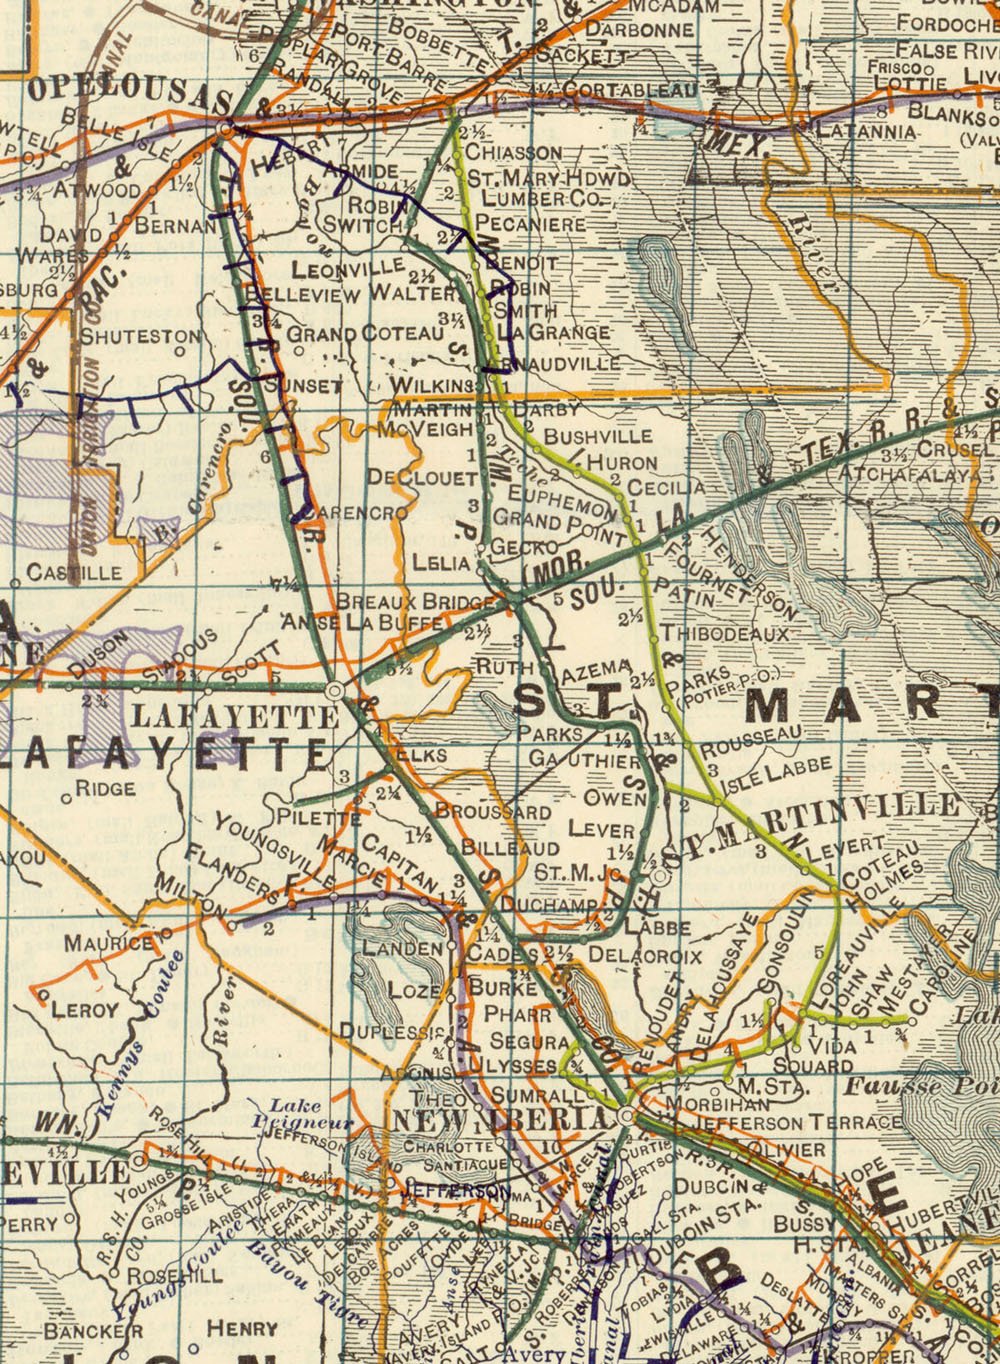 New Iberia & Northern Railroad Company, Map Showing Route in 1922.